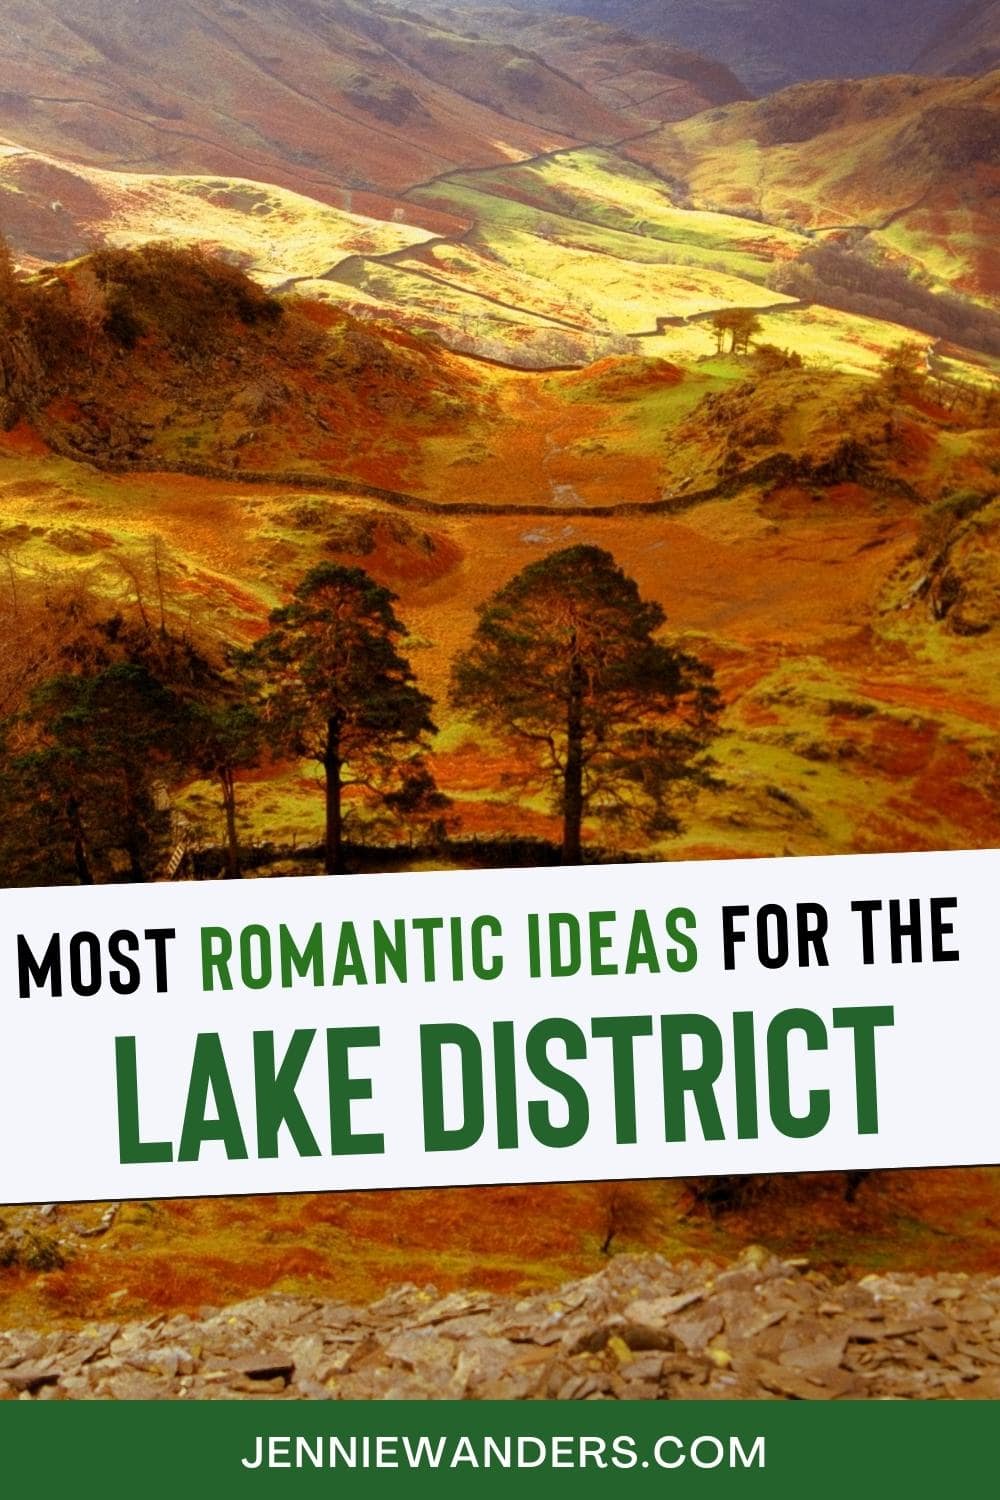 LAKE DISTRICT FOR COUPLES